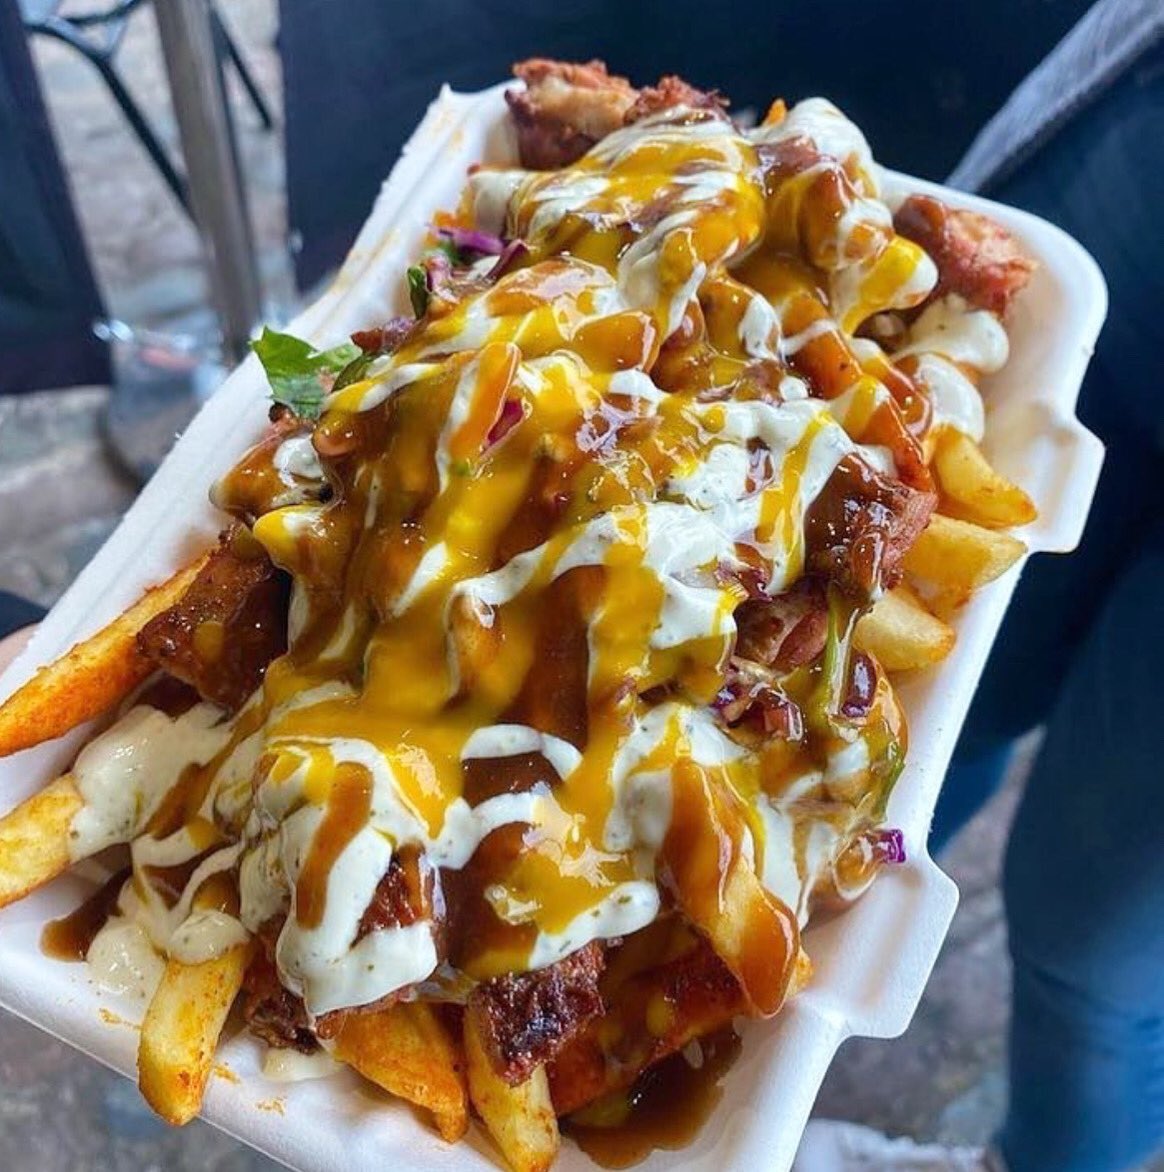 Having our mega loaded fries from @VinegarYardLDN for lunch - the best idea you’ve had all week 😛🙌🏾 Question is, would you share them or split them? 🤔